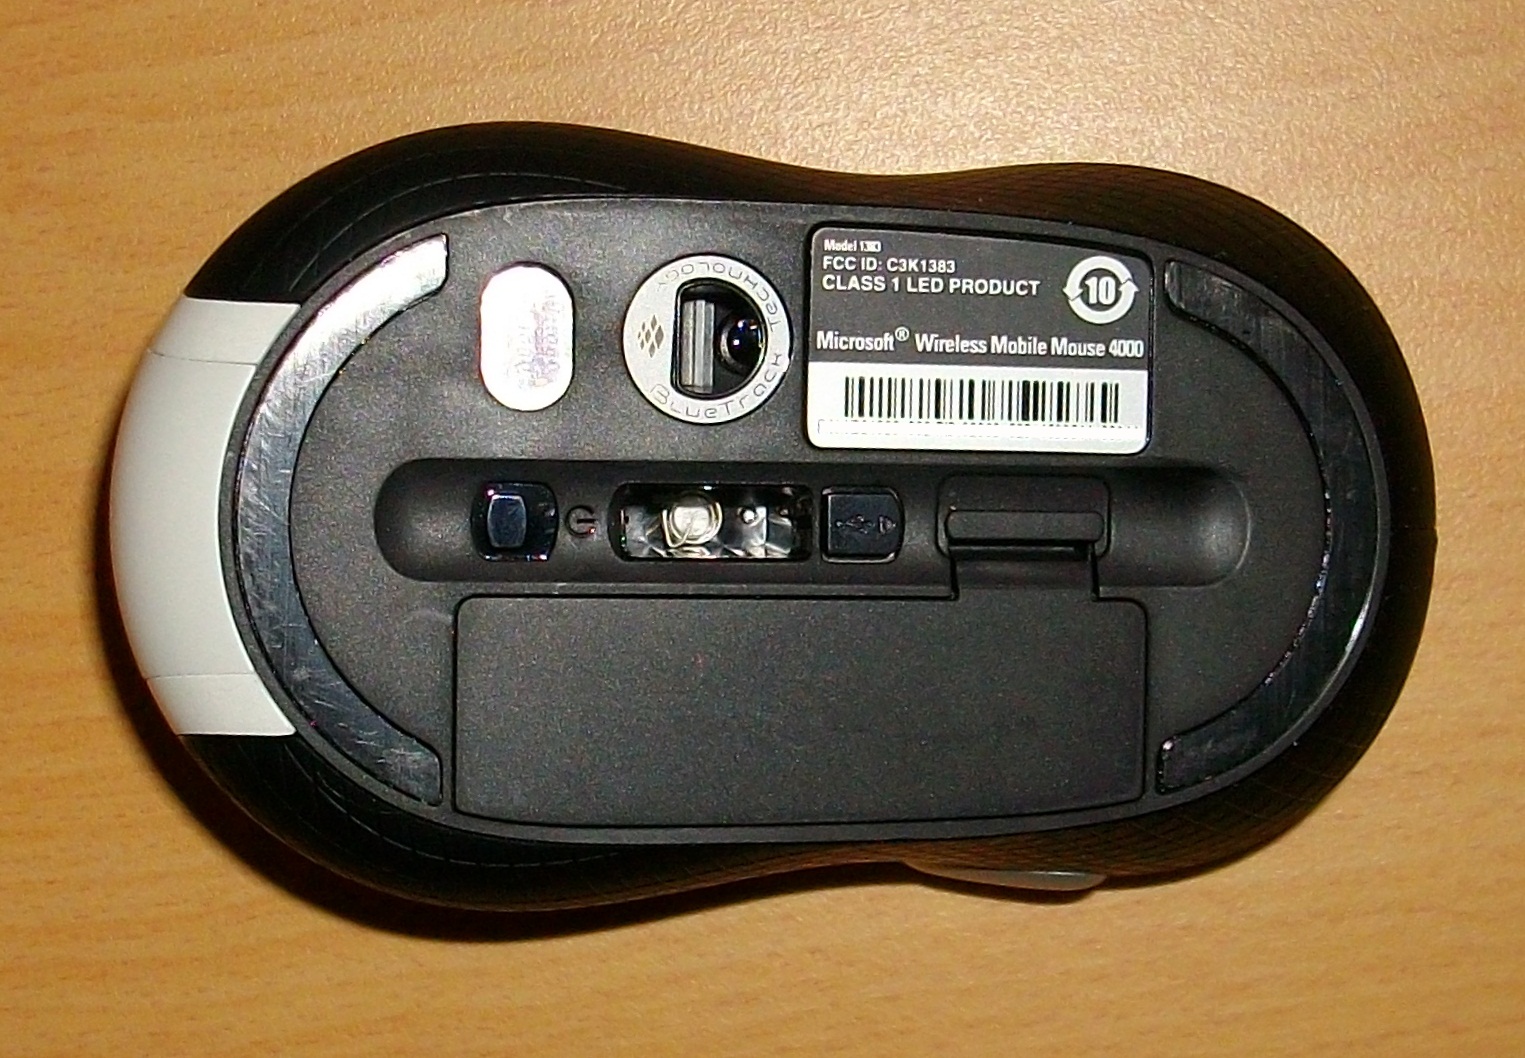 microsoft wireless mobile mouse 4000 left side button